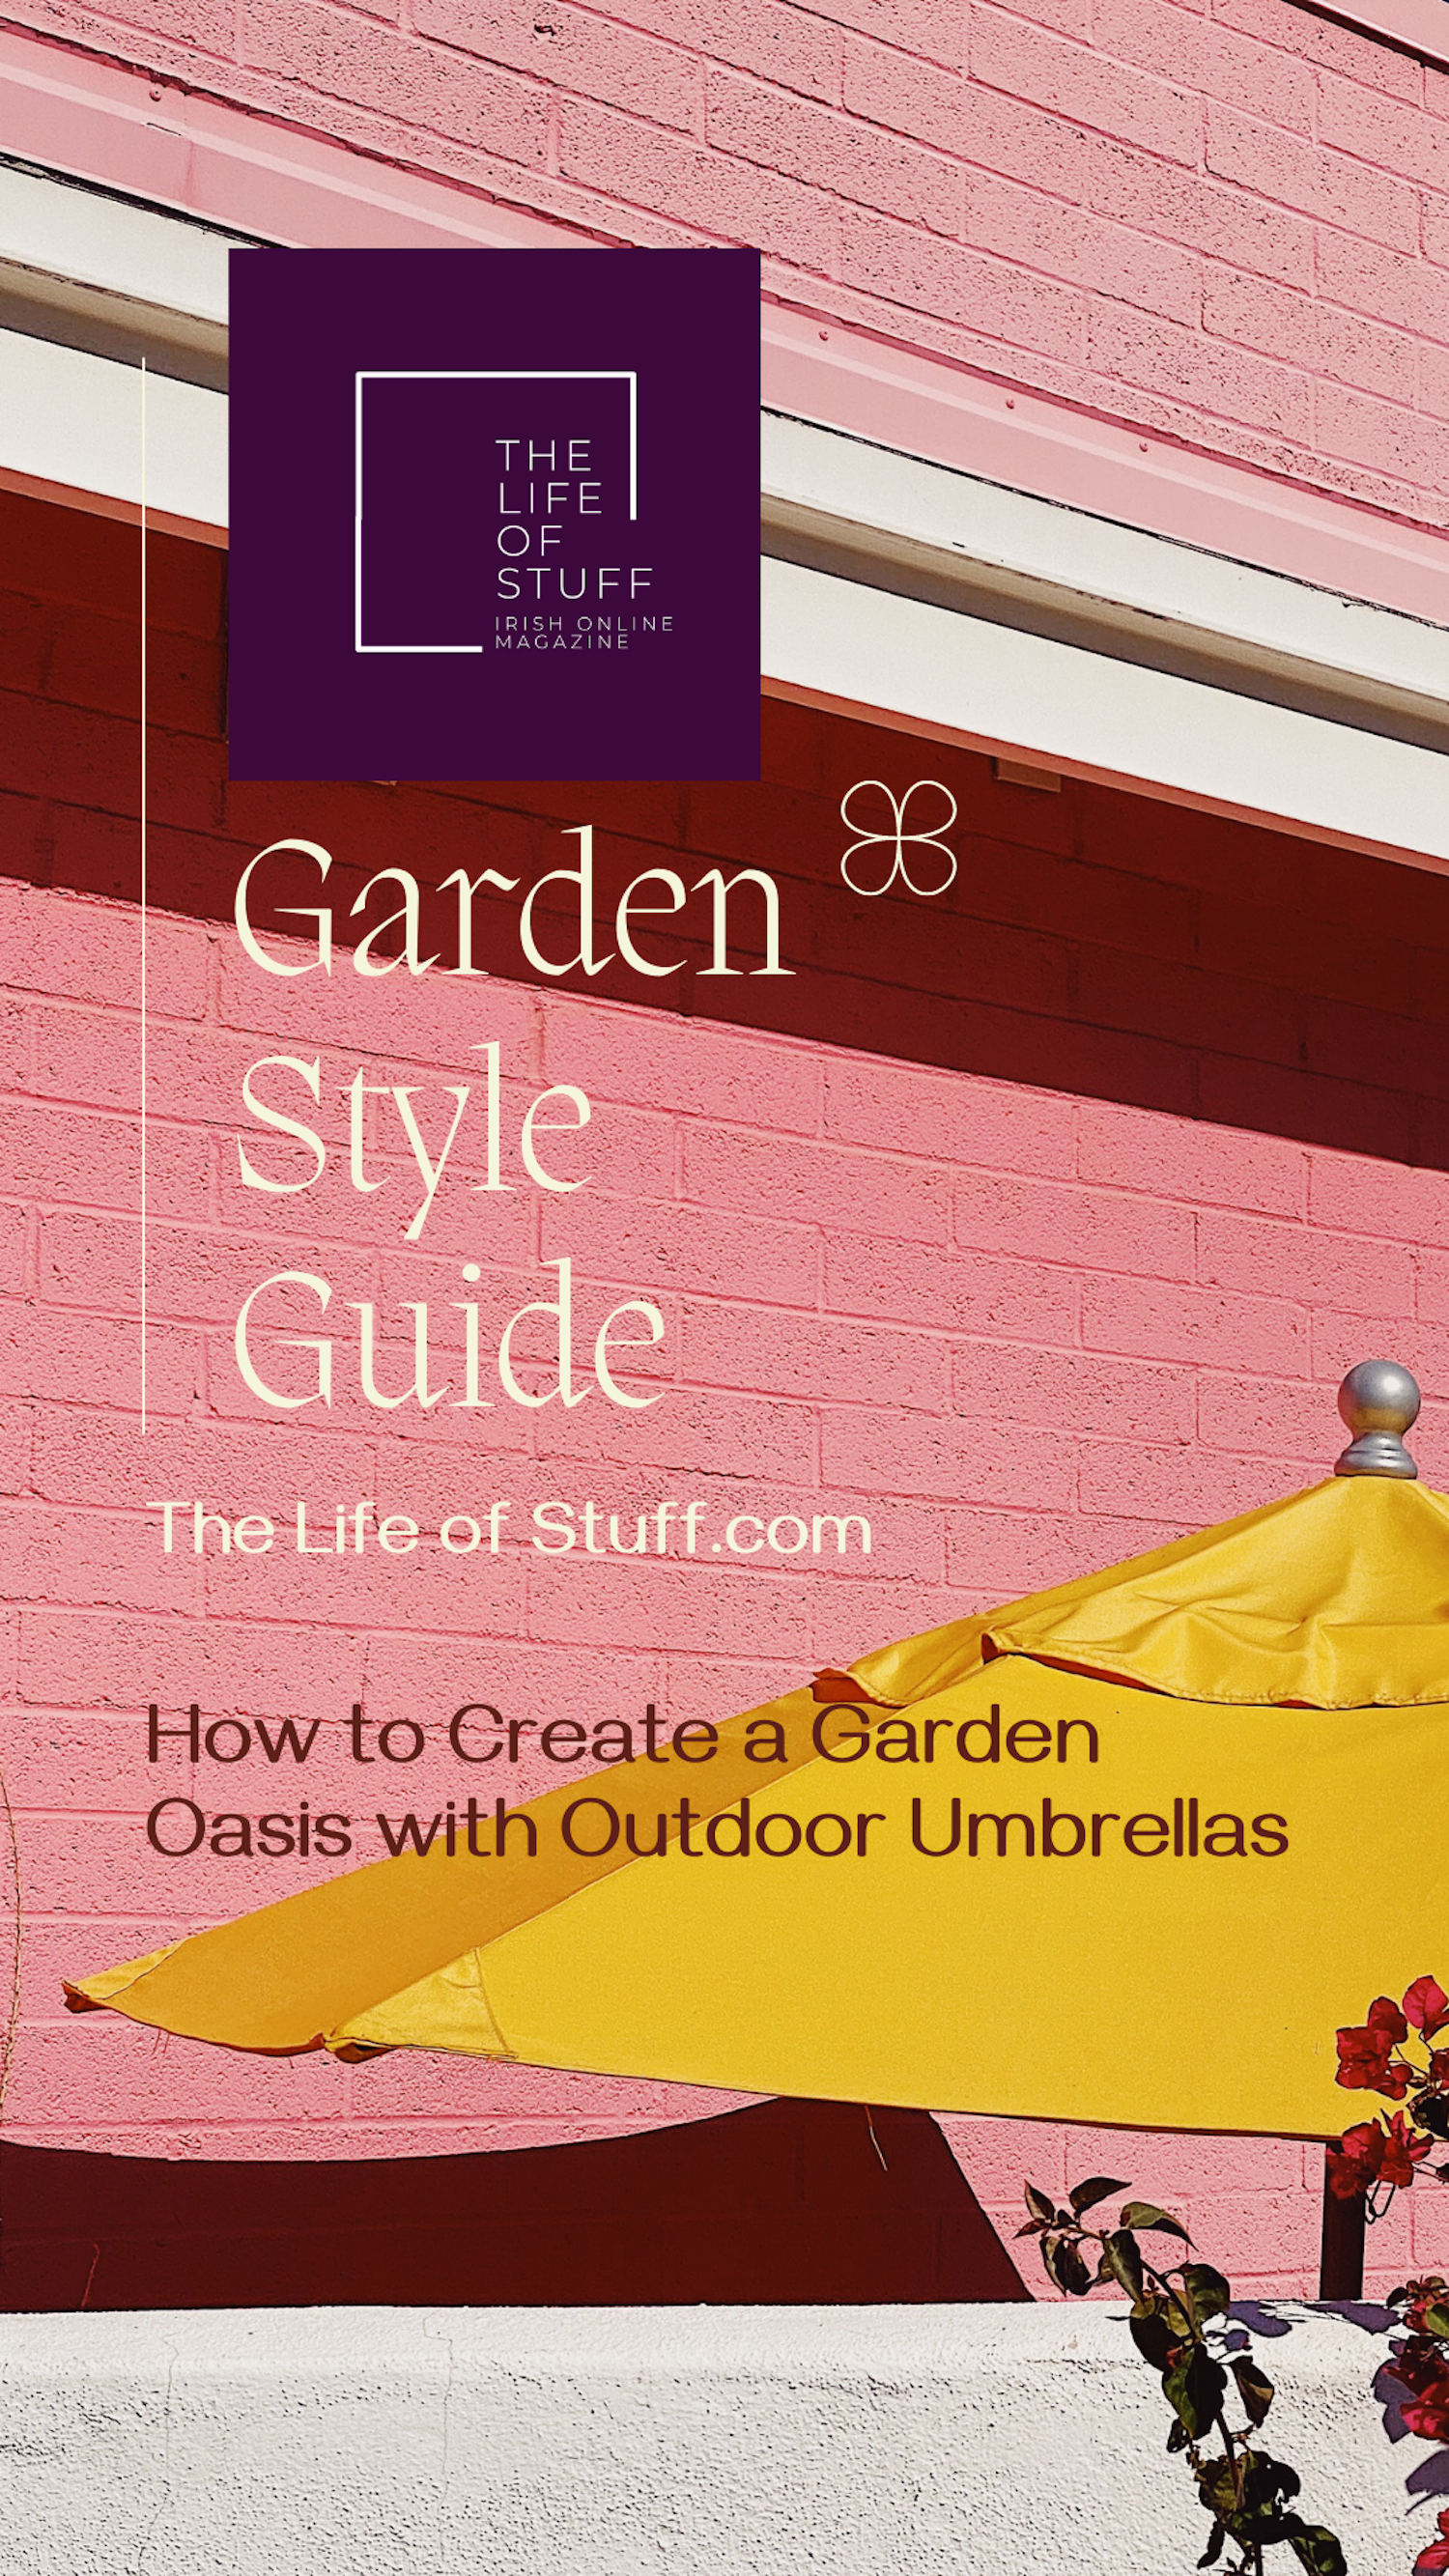 How to Create a Garden Oasis with Outdoor Umbrellas in 5 Steps - The Life of Stuff